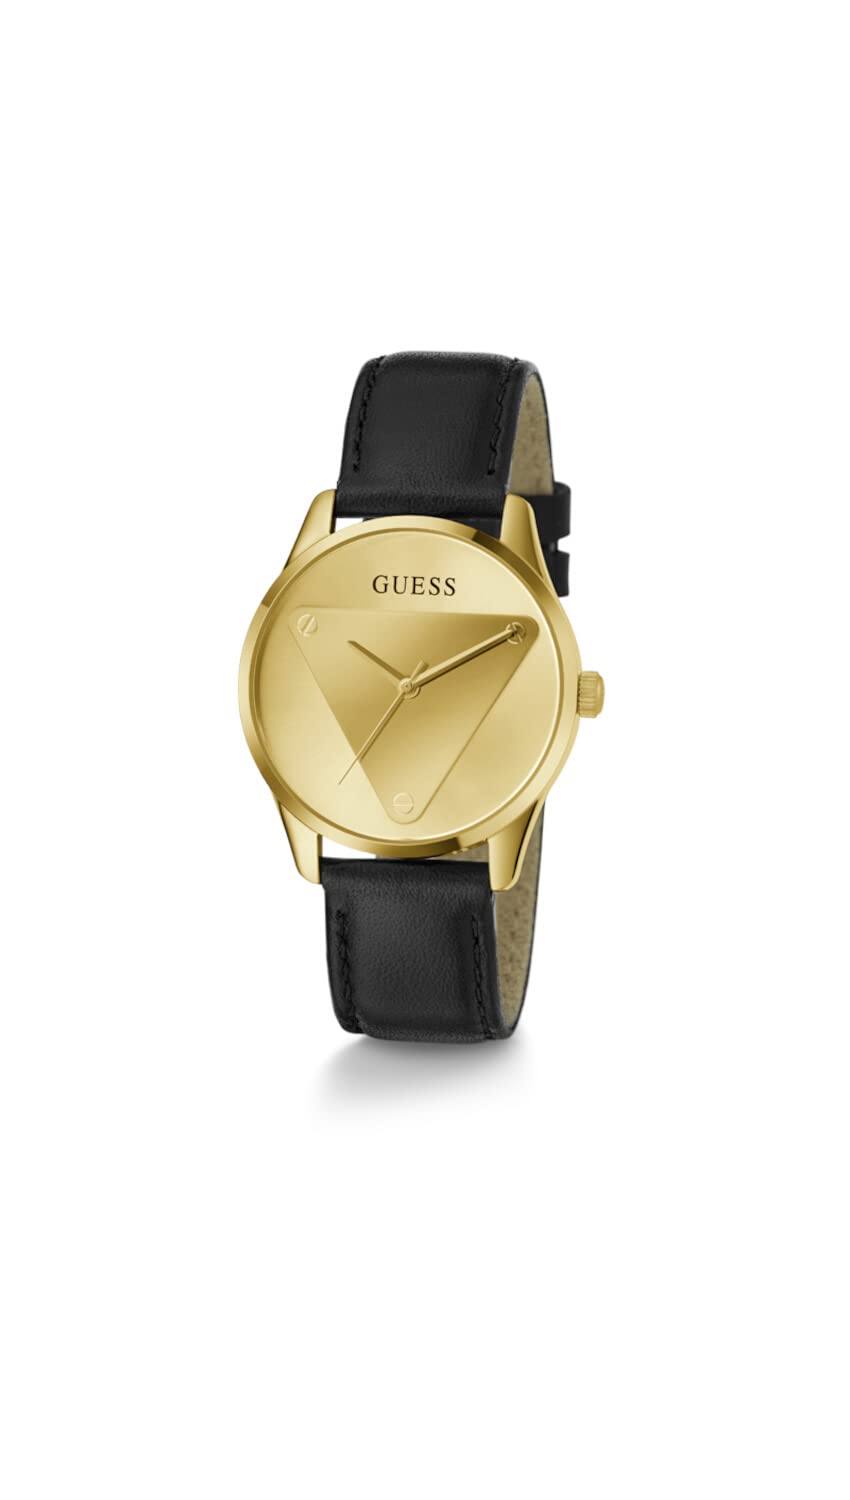 GUESS Ladies 36mm Watch - Black Strap Champagne Dial Gold Tone Case